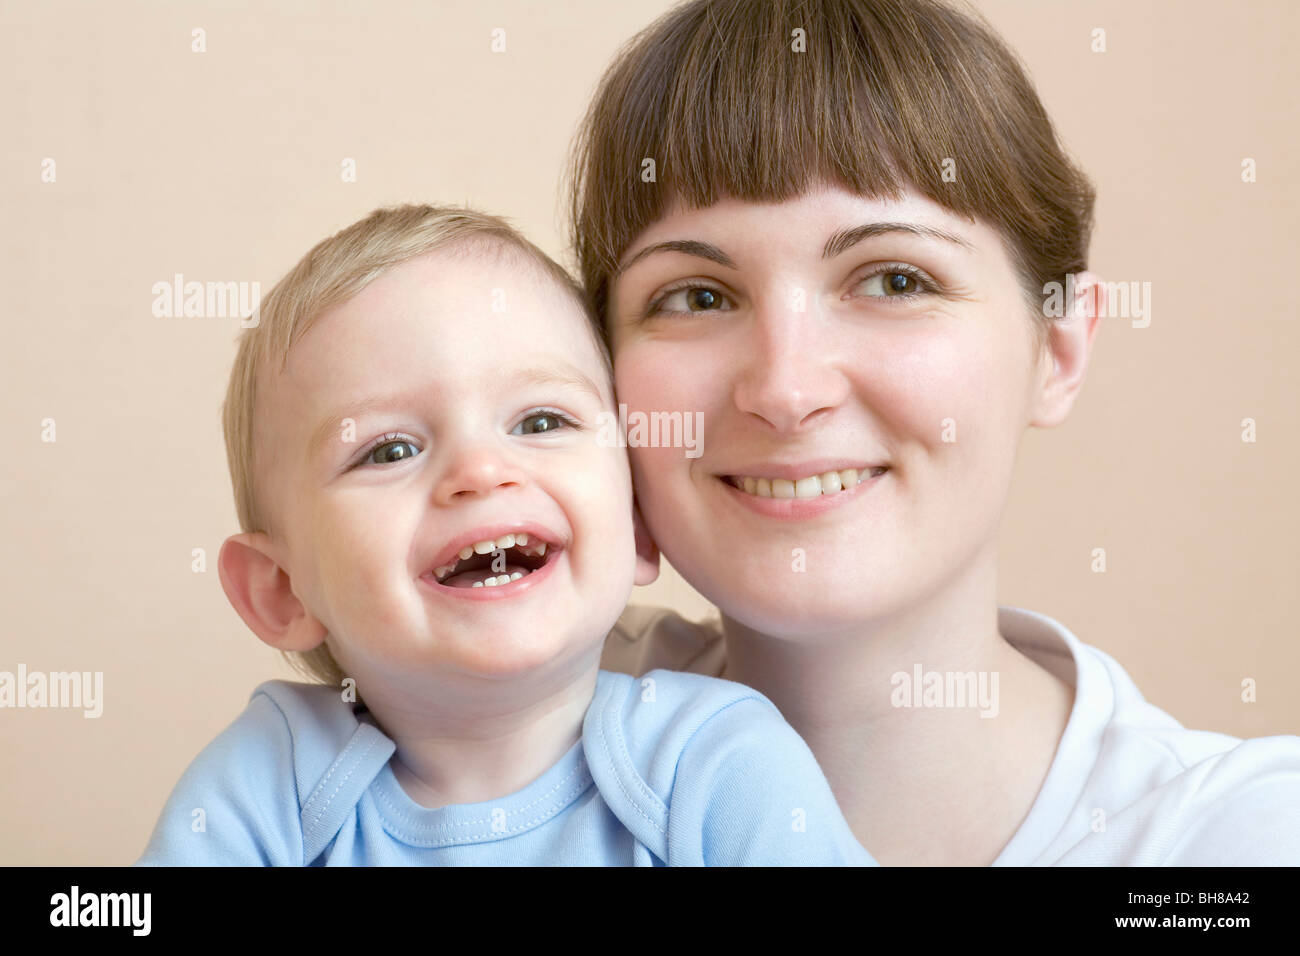 A woman and her baby, portrait, studio shot Stock Photo